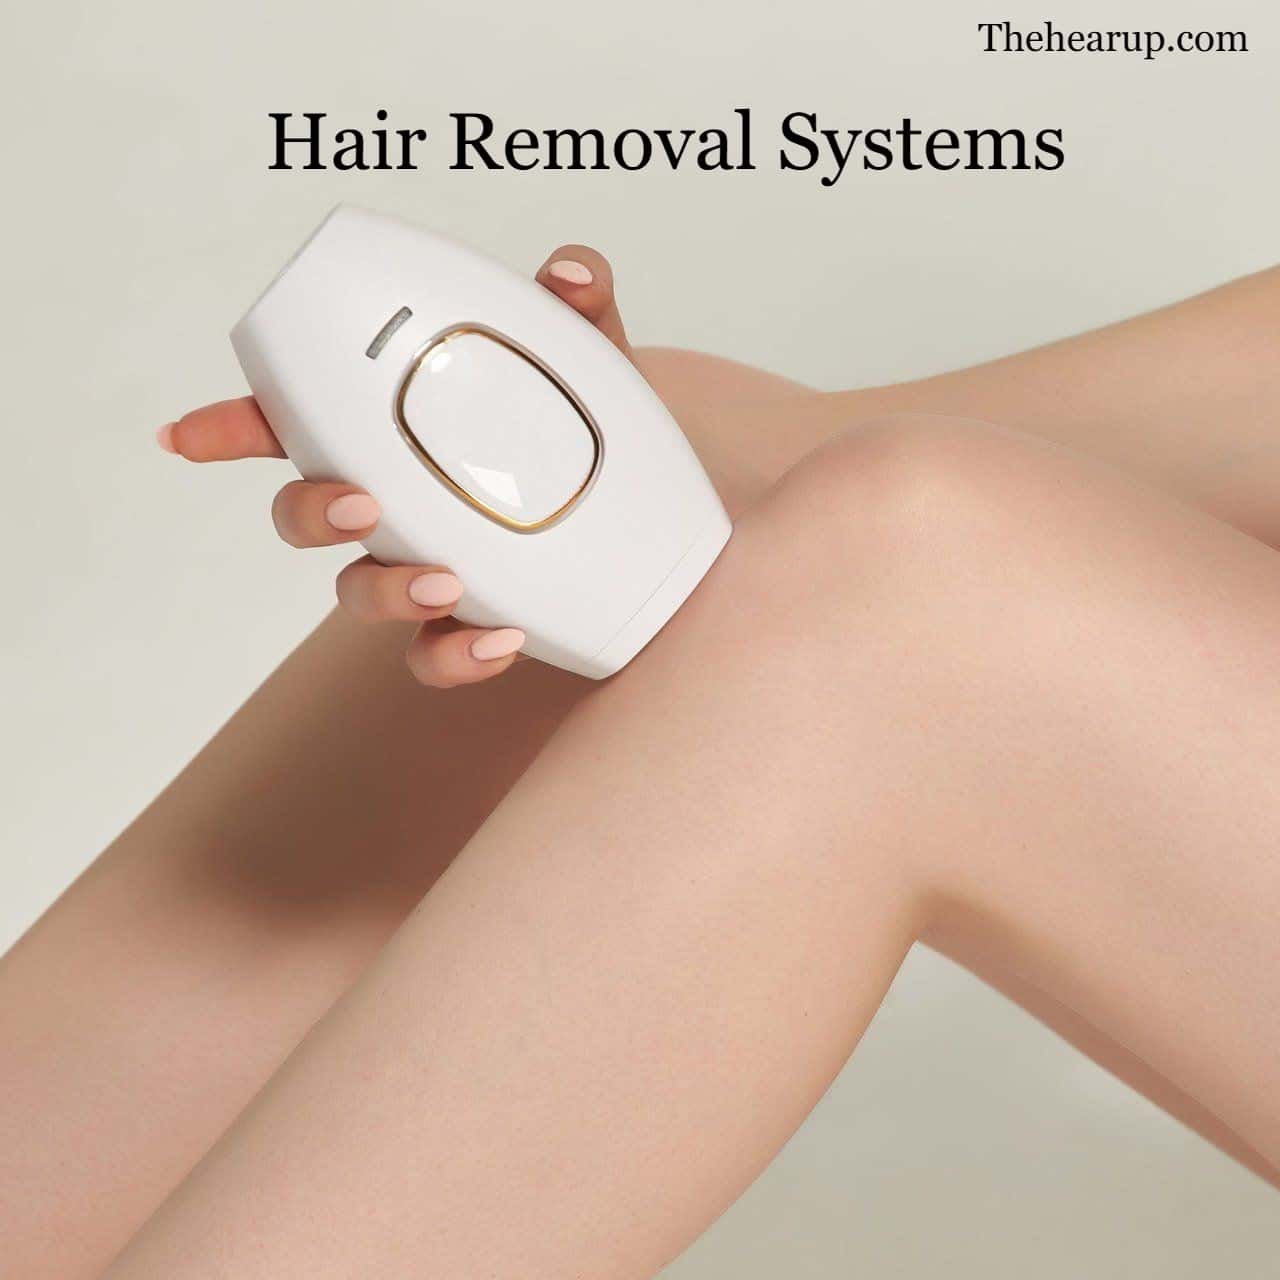 Hair Removal Systems